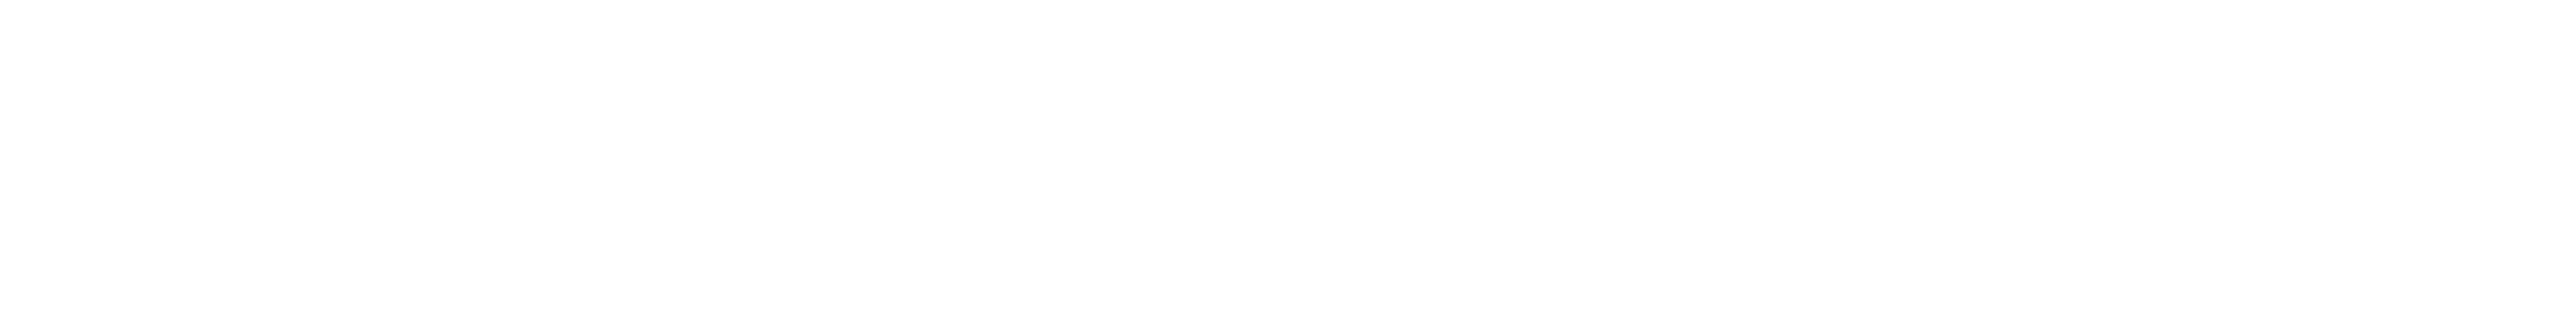 Michigan Association for Education of Young Children Logo